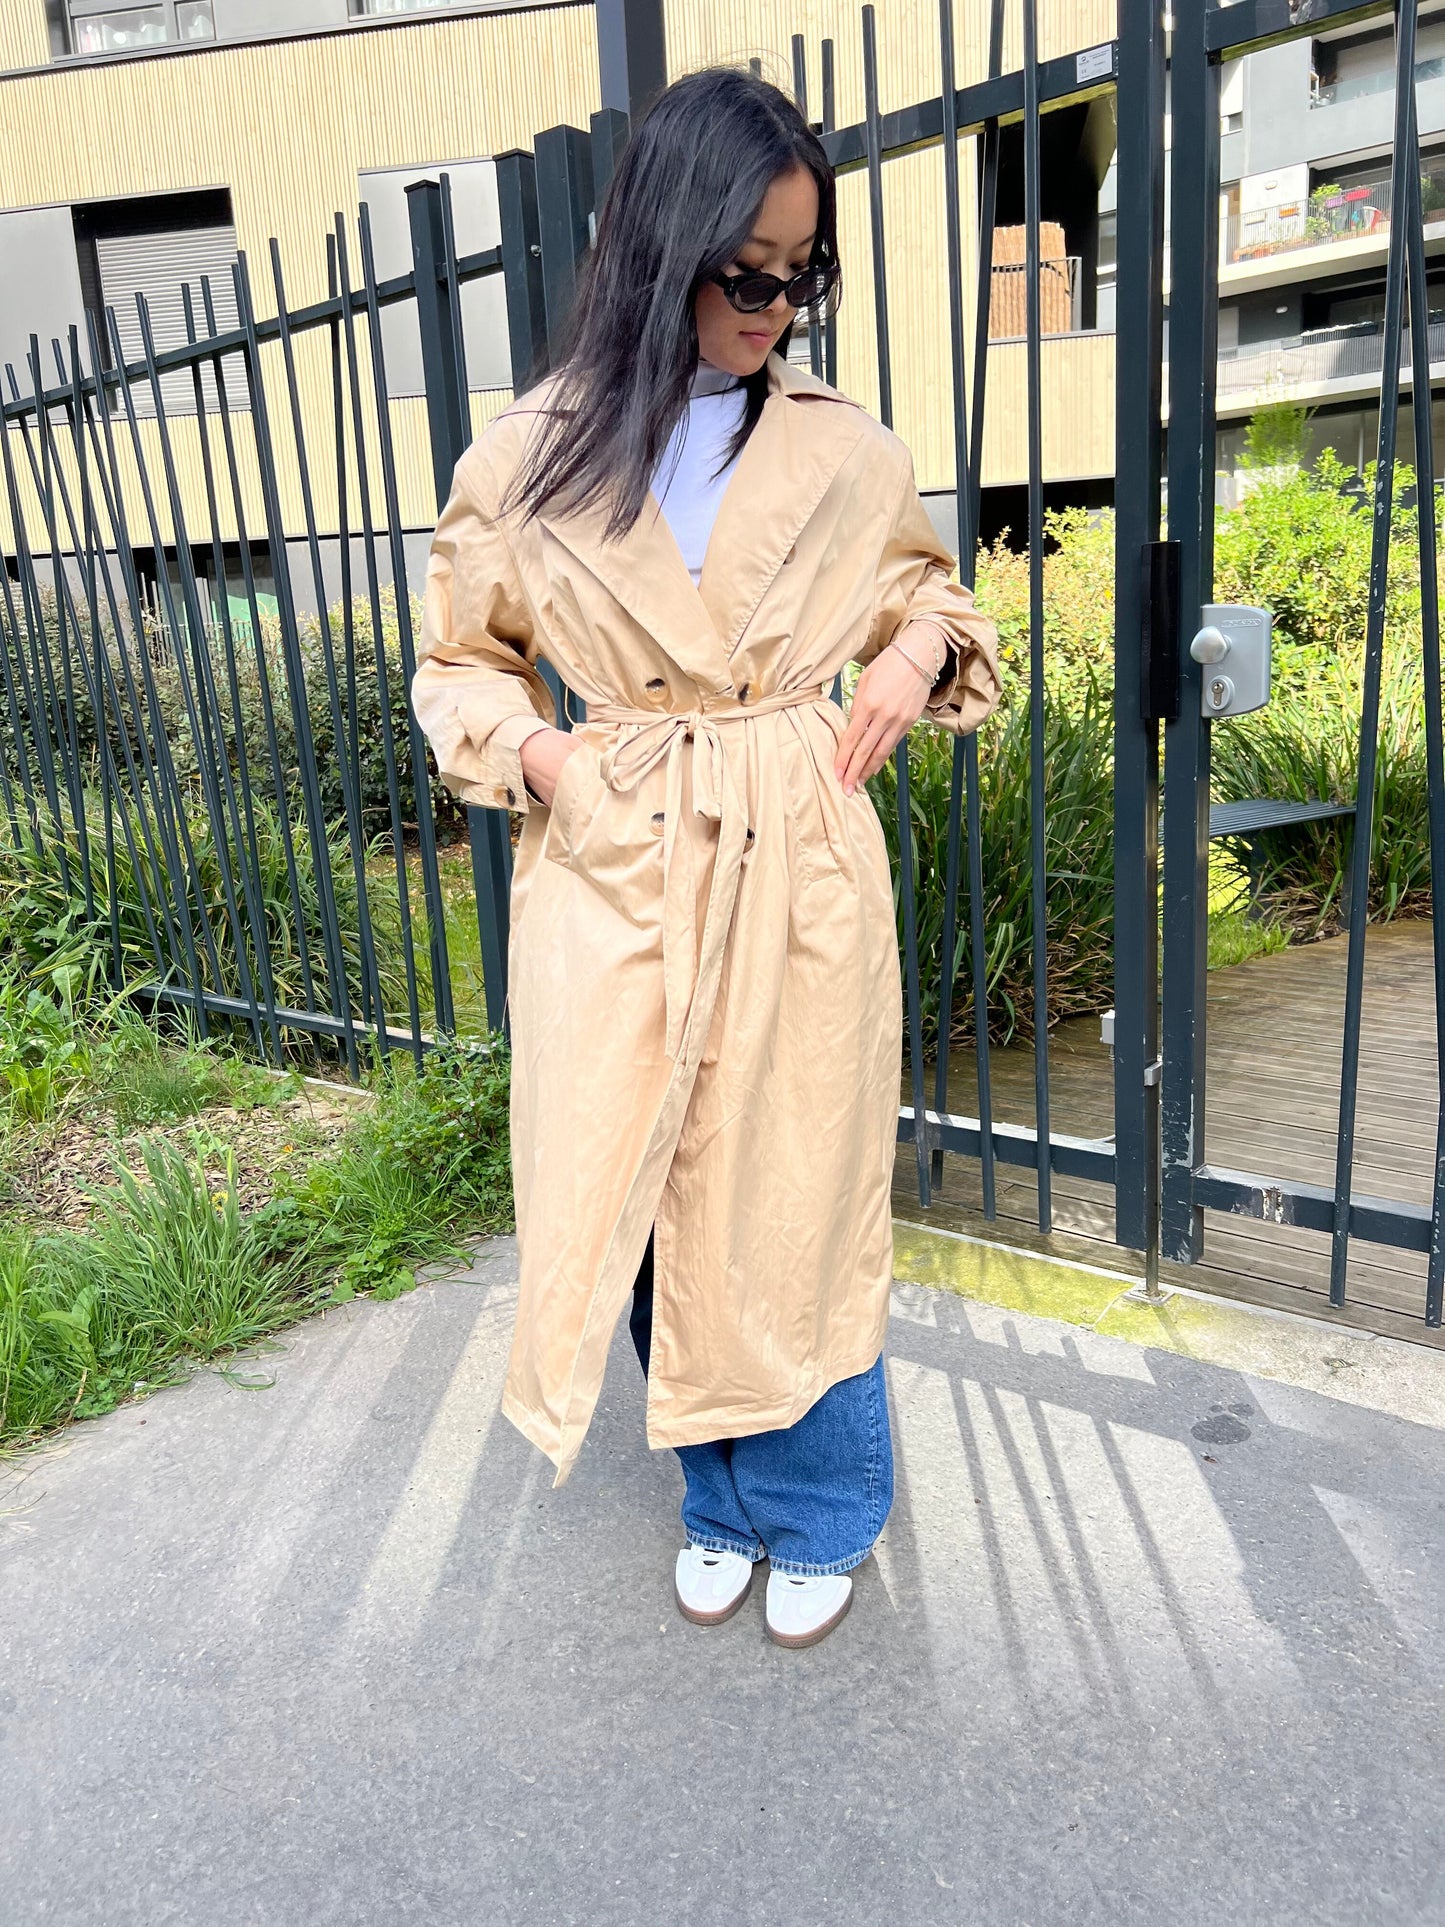 Long trench